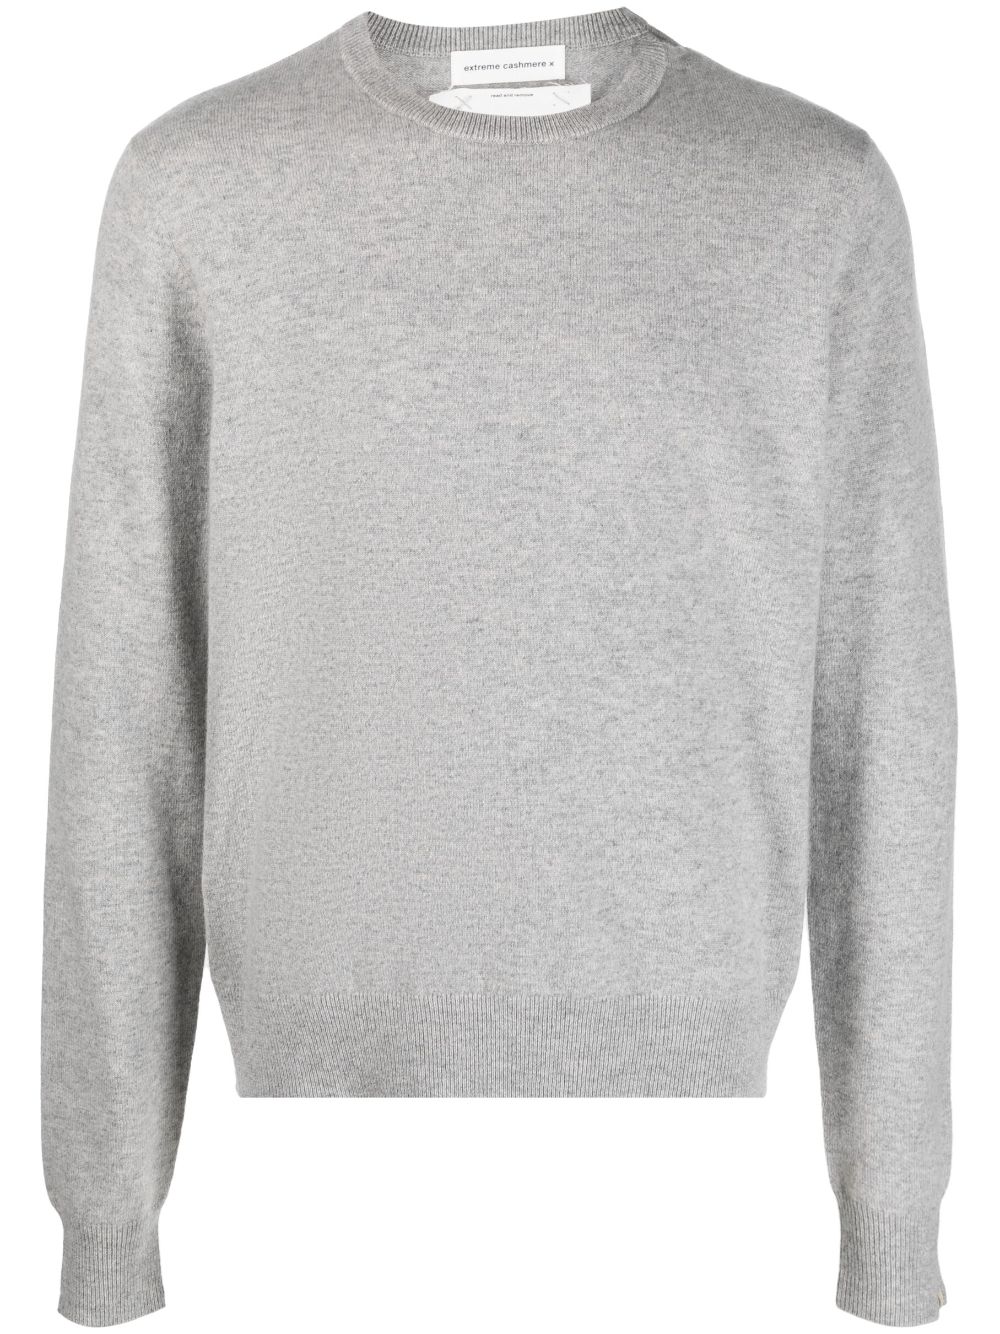 Extreme Cashmere N36 Long-sleeved Knitted Jumper In Grey